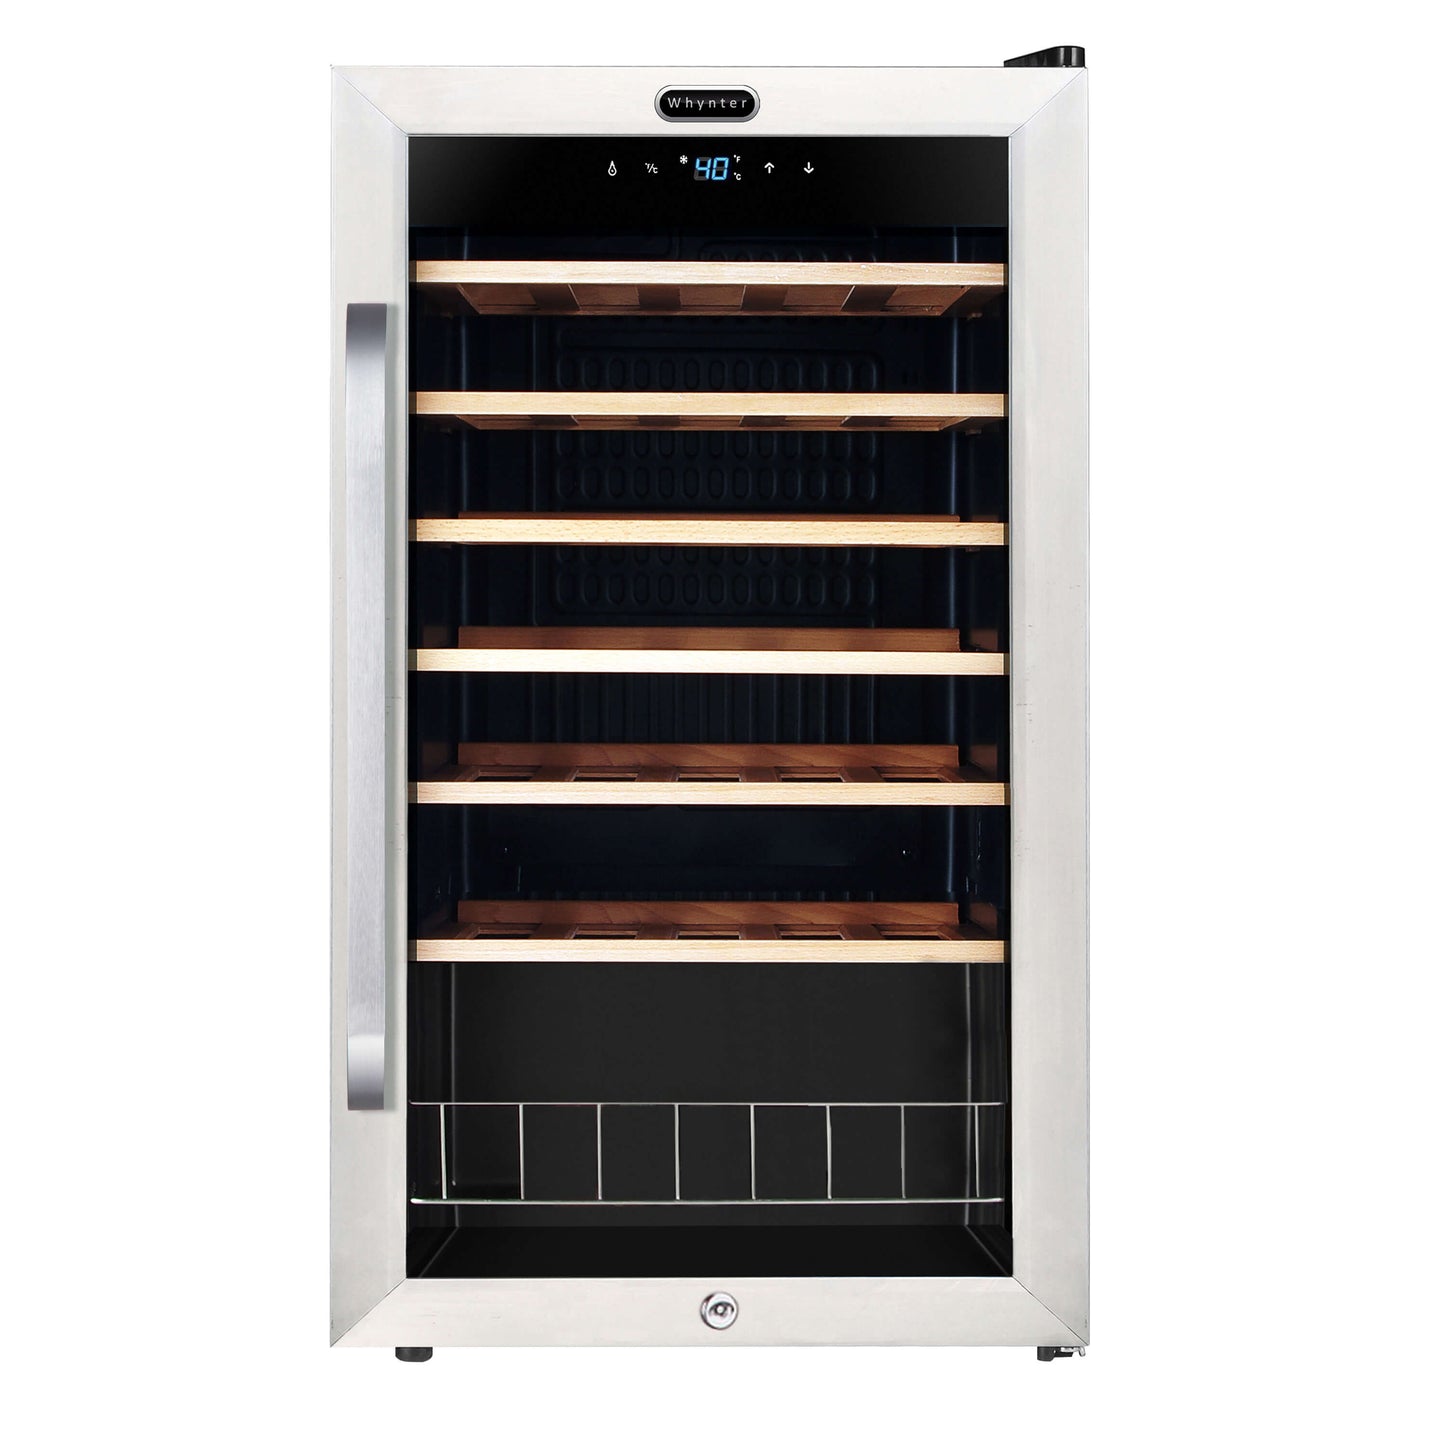 Whynter Wine Refrigerator Whynter FWC-341TS 34 Bottle Freestanding Stainless Steel Wine Refrigerator with Display Shelf and Digital Control